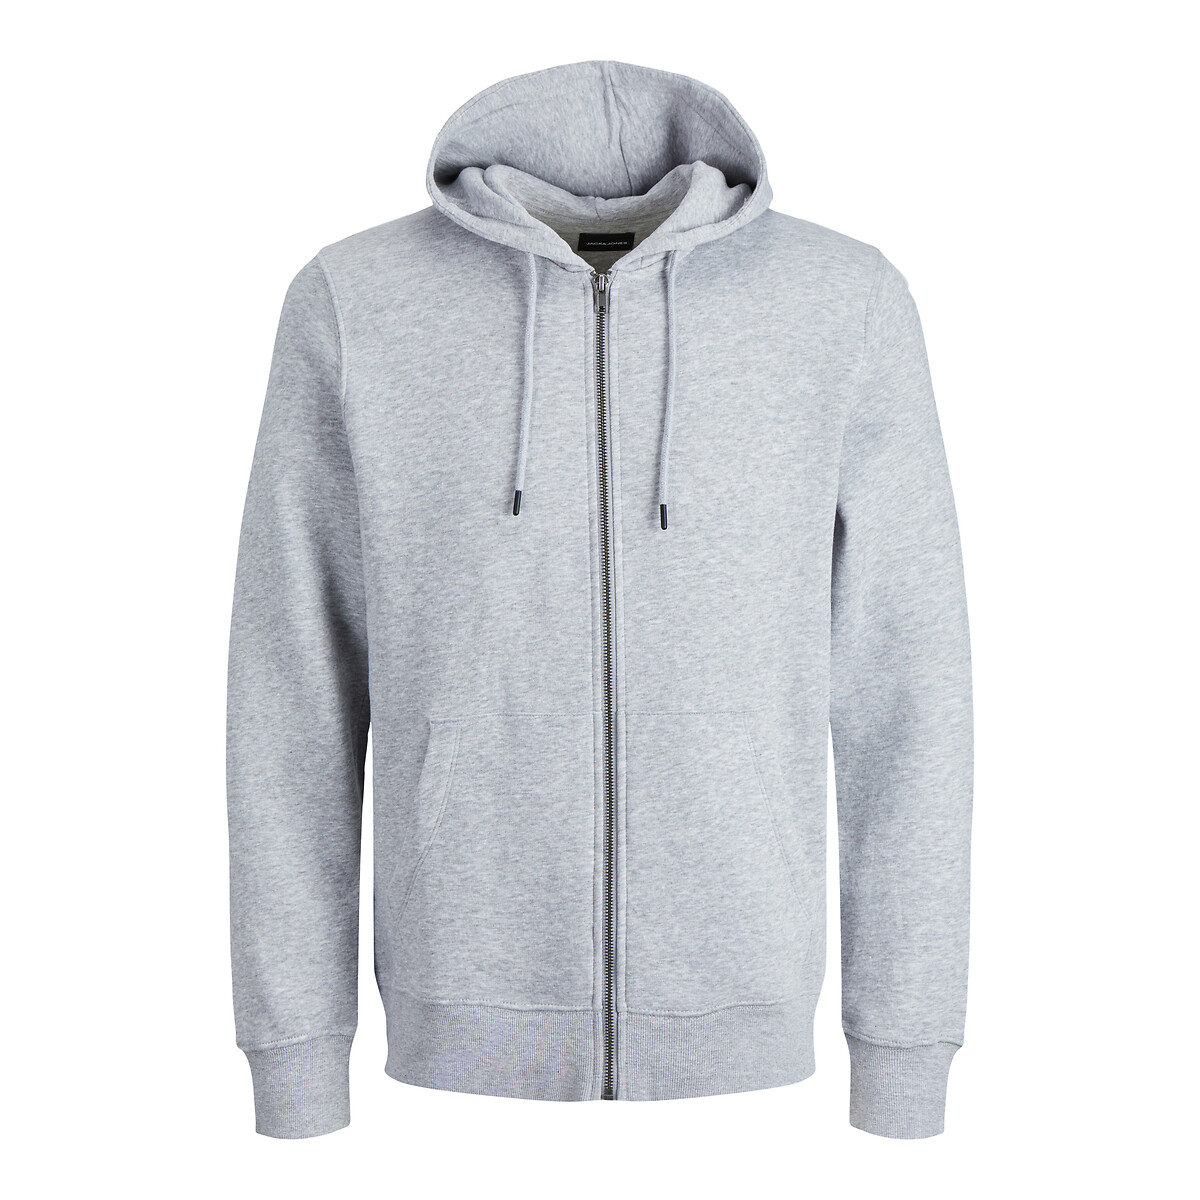 Star Basic Hoodie in Cotton Mix with Zip Fastening